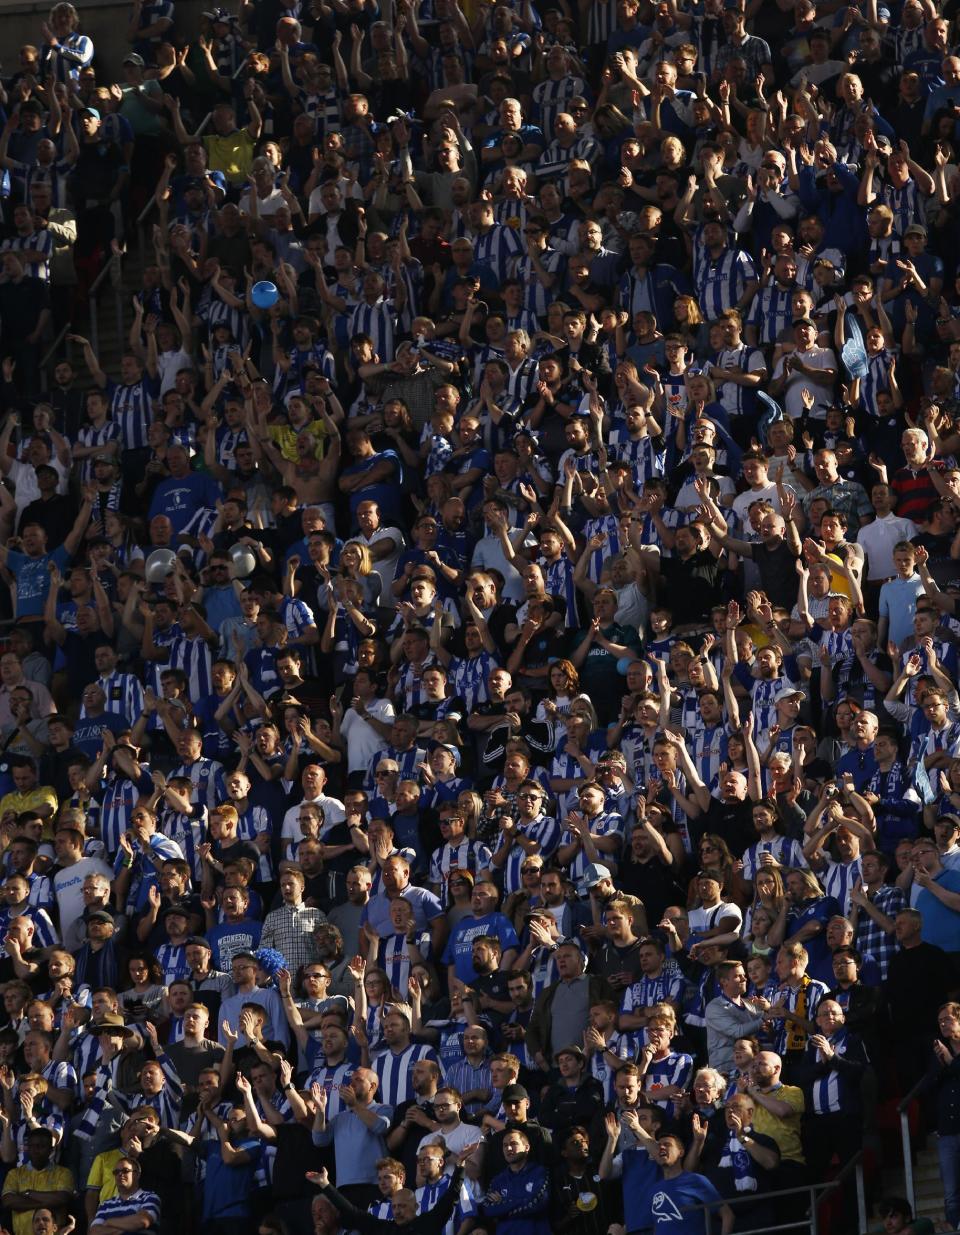 Britain Soccer Football - Hull City v Sheffield Wednesday - Sky Bet Football League Championship Play-Off Final - Wembley Stadium - 28/5/16 Sheffield Wednesday fans Action Images via Reuters / Andrew Couldridge Livepic EDITORIAL USE ONLY. No use with unauthorized audio, video, data, fixture lists, club/league logos or "live" services. Online in-match use limited to 45 images, no video emulation. No use in betting, games or single club/league/player publications. Please contact your account representative for further details.